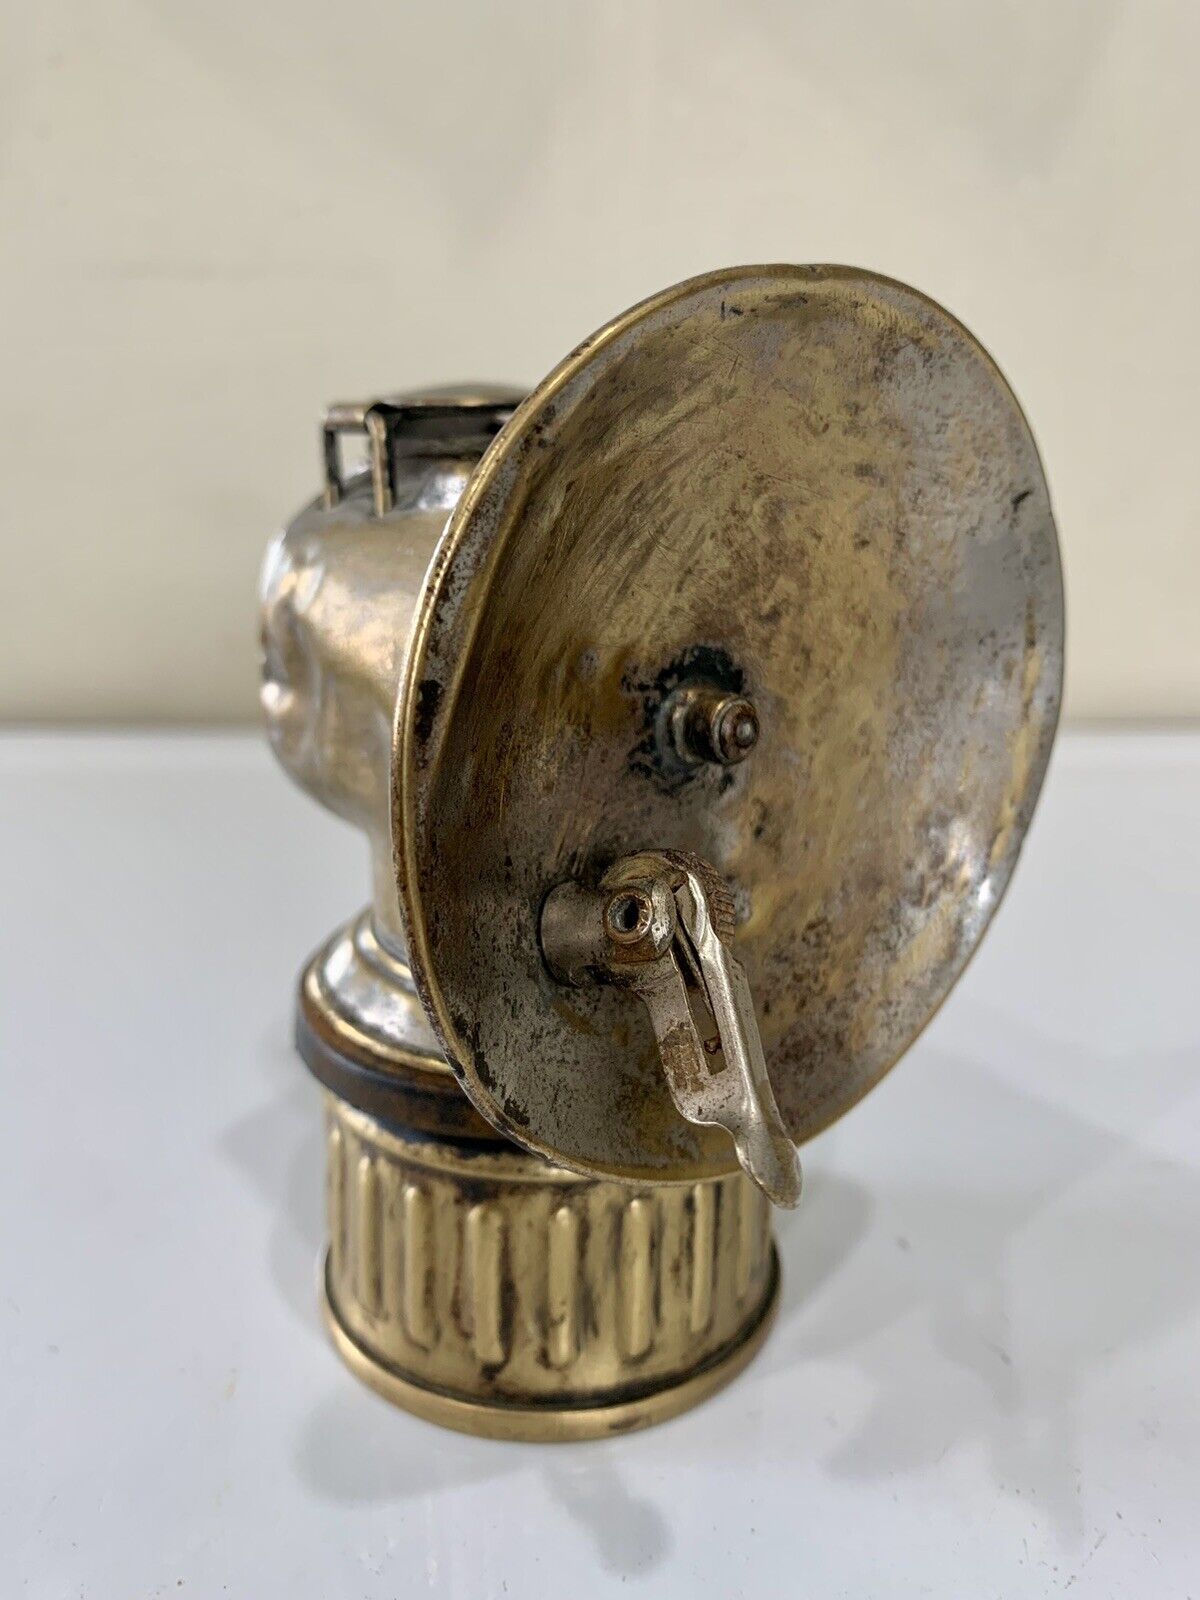 Justrite Carbide Miners Lamp With 1922 FRISBIE SNAP SPARKER PATENT/ 3in Saucer